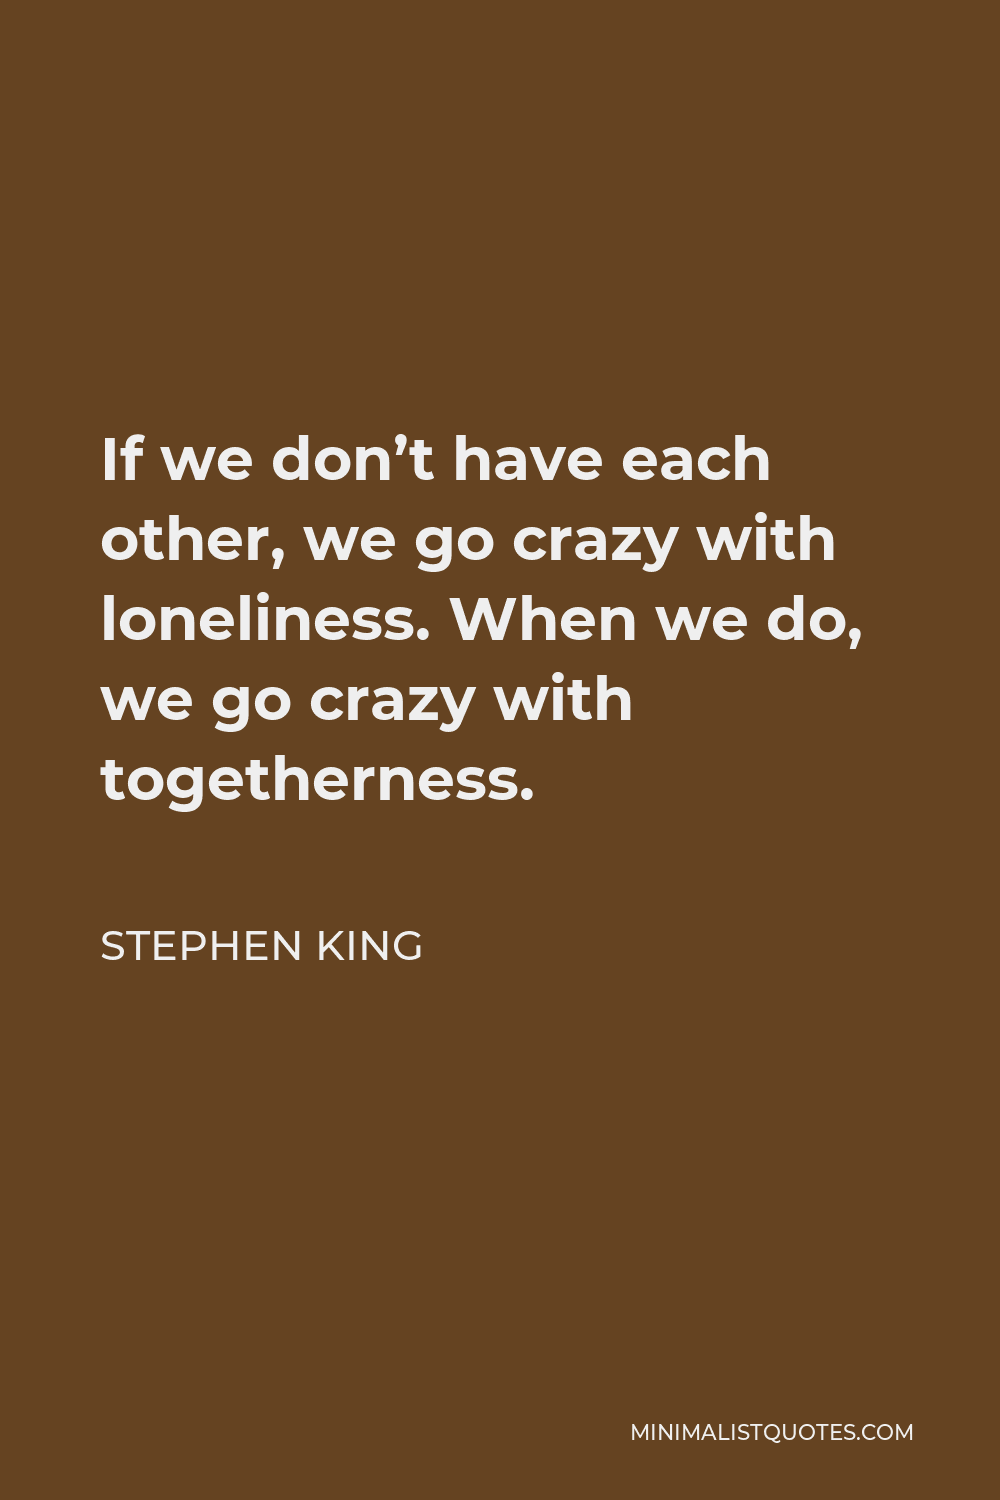 Stephen King Quote - If we don’t have each other, we go crazy with loneliness. When we do, we go crazy with togetherness.